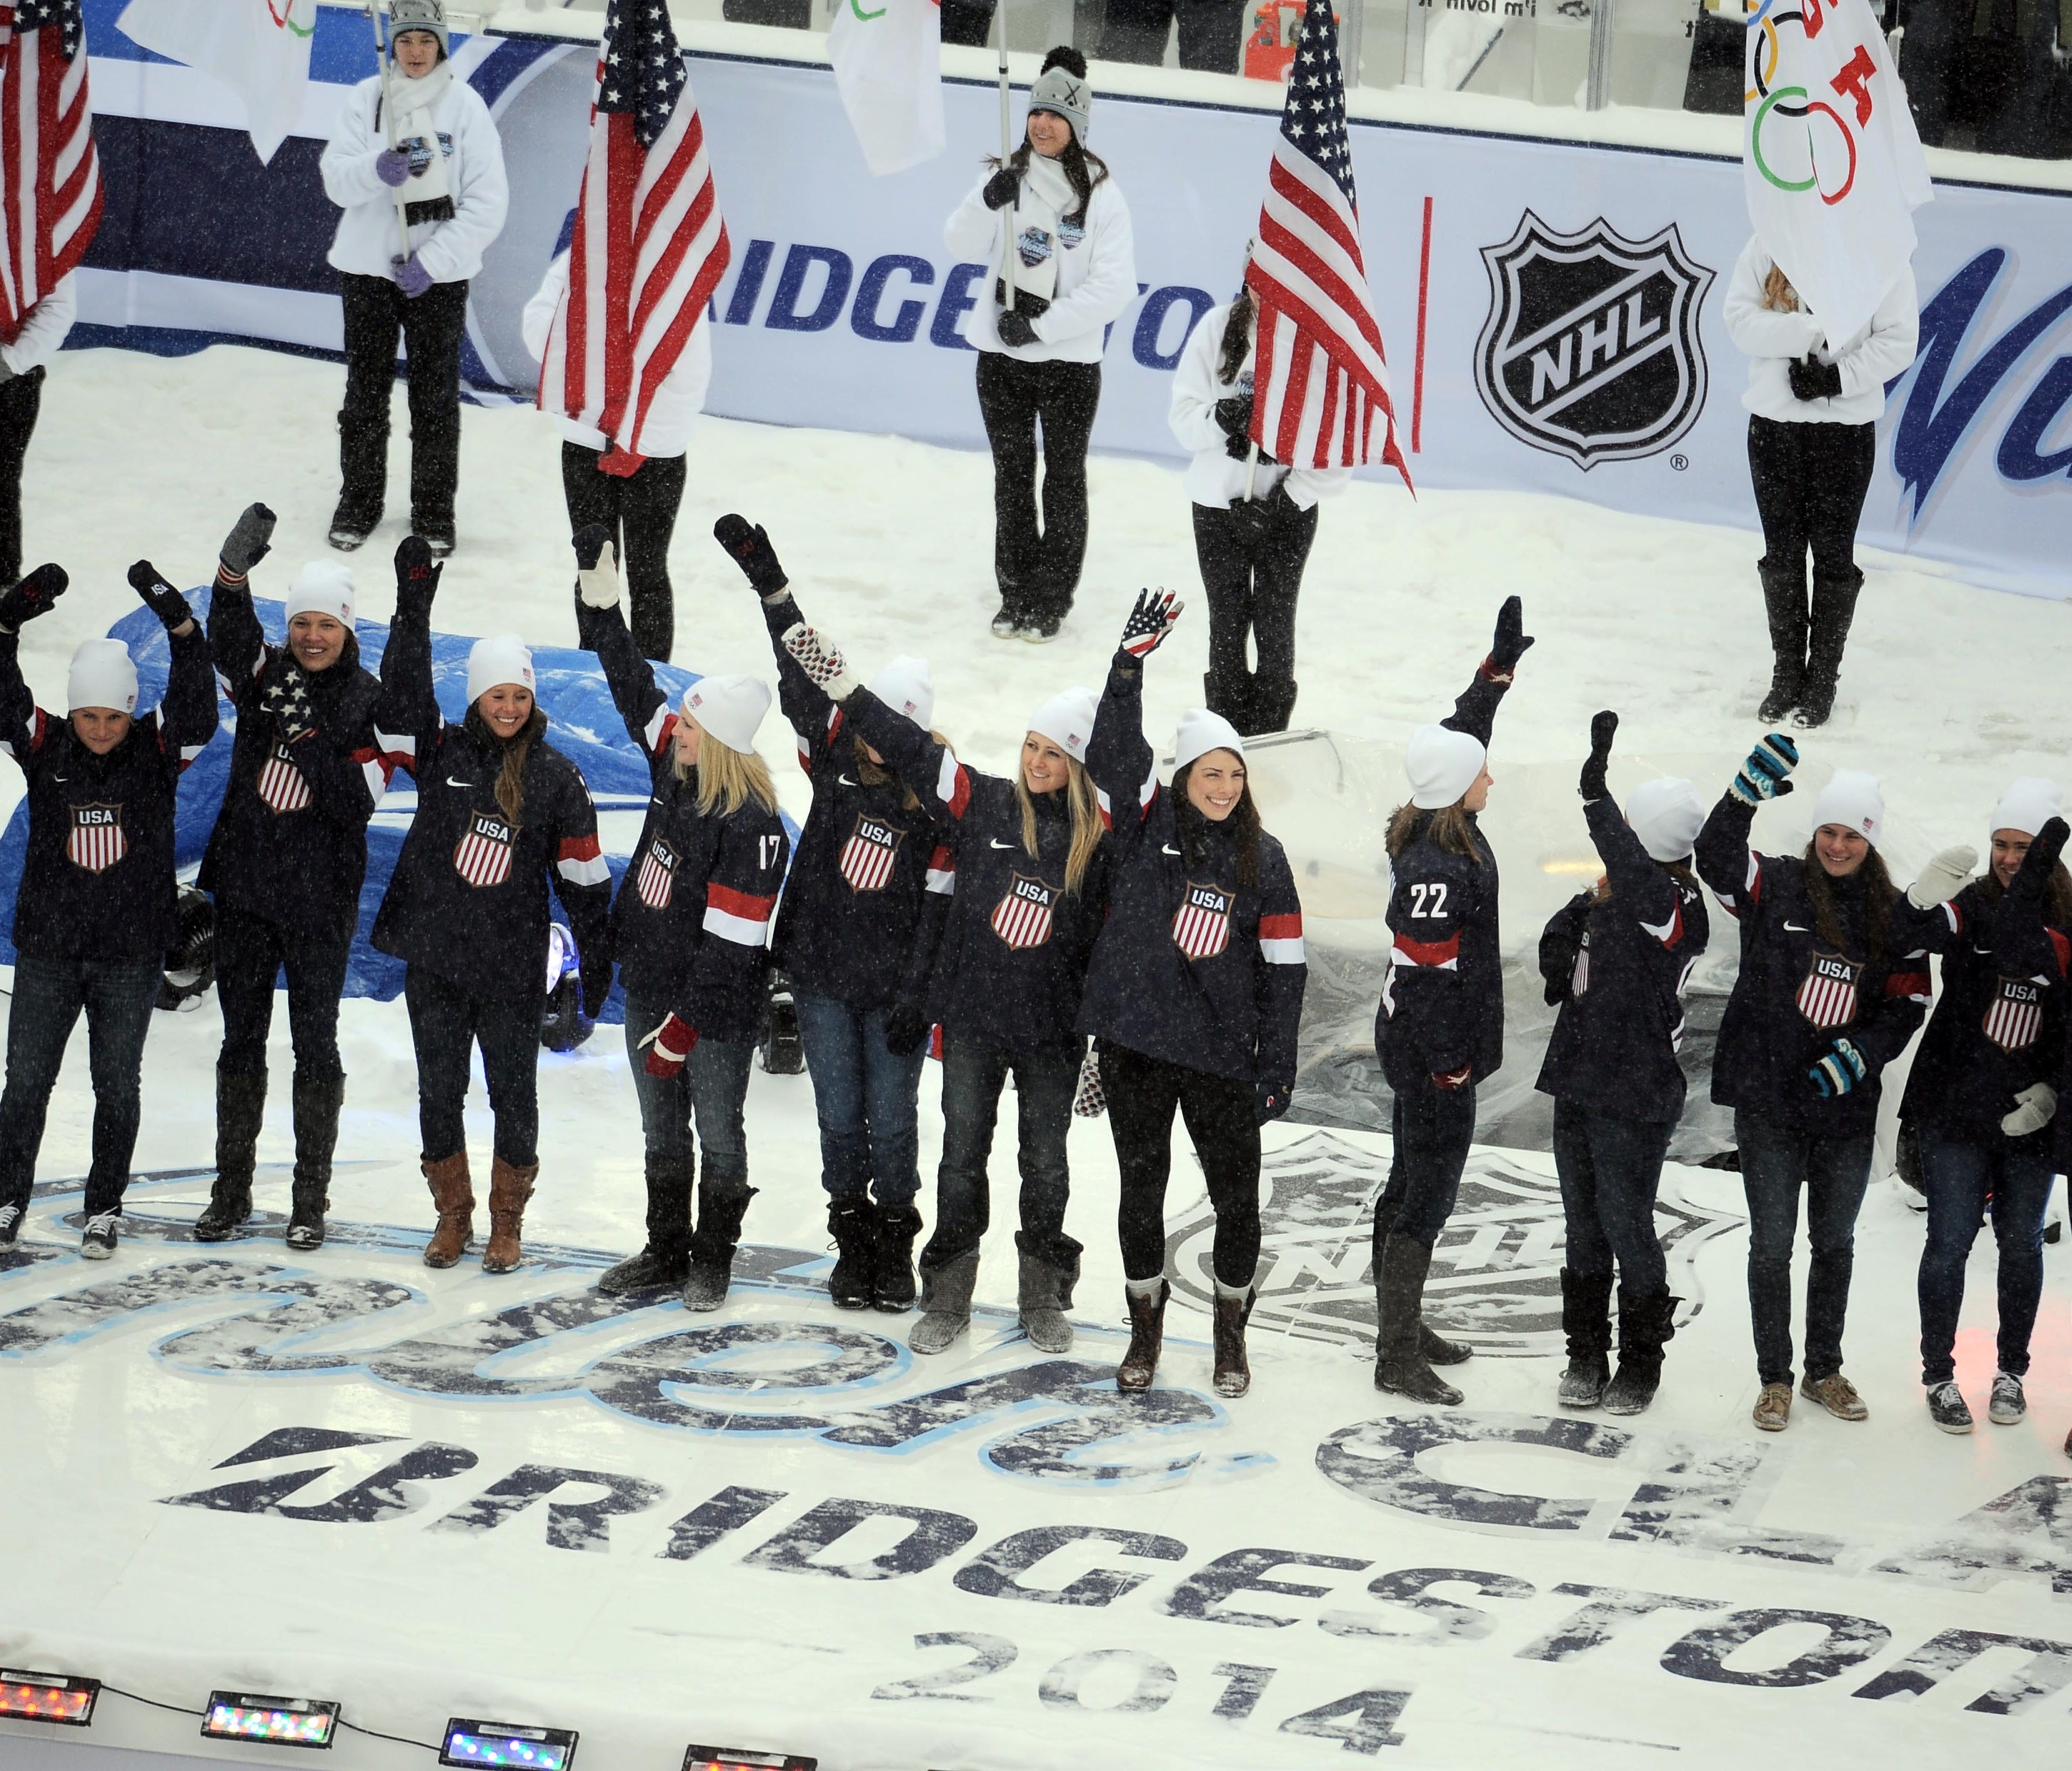 The U.S. women's hockey team has garnered support from the NHL, NBA, MLB and NFL.